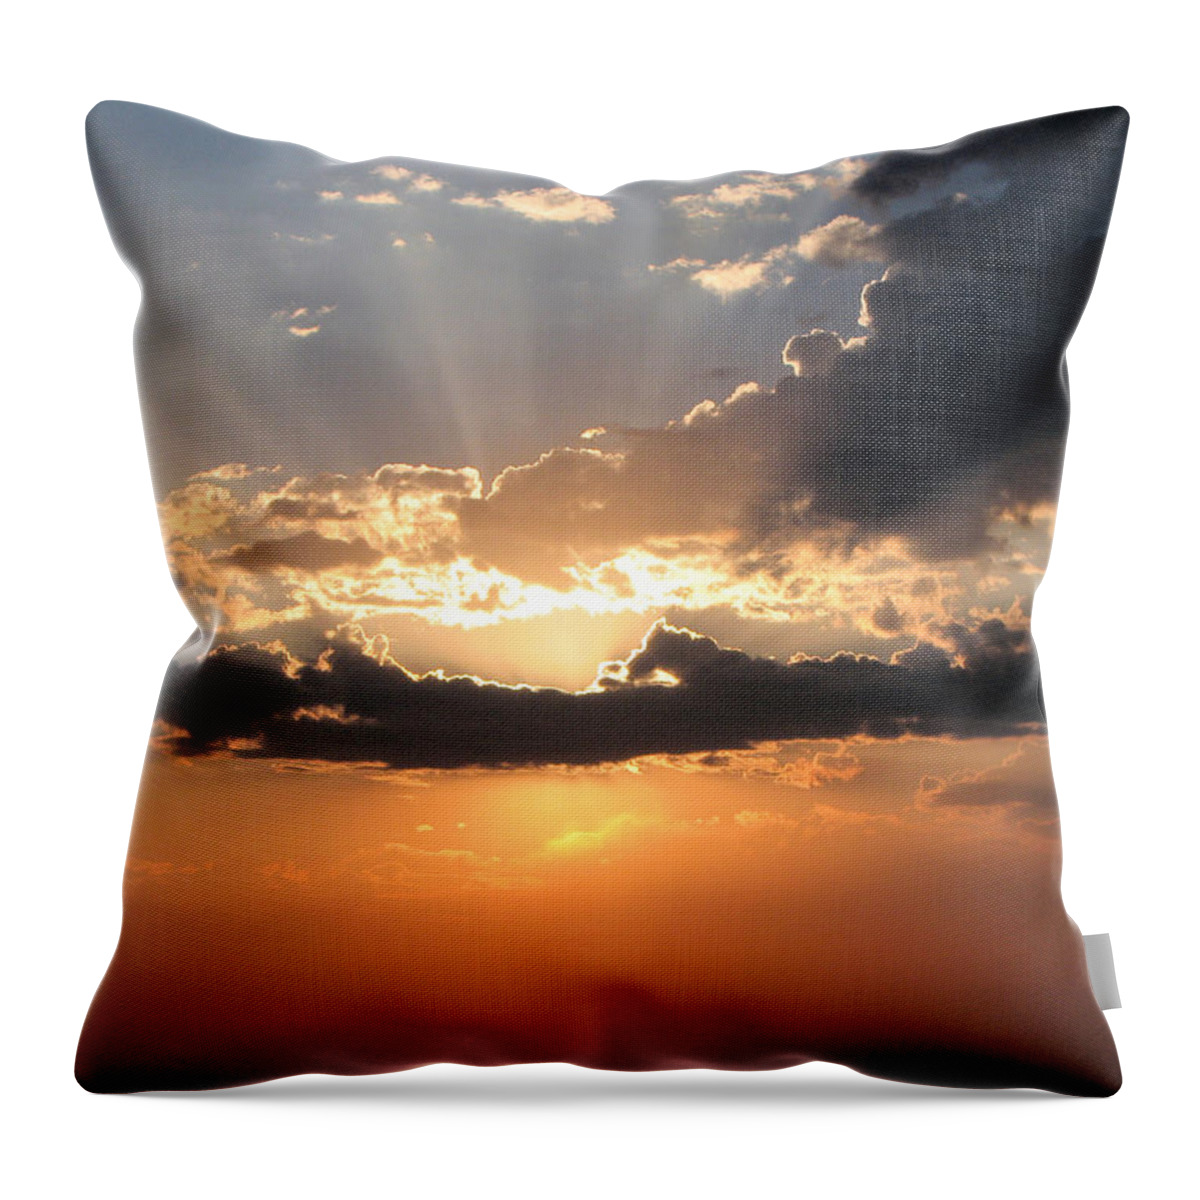 Sunset Throw Pillow featuring the photograph Sun Rays by Darcy Tate